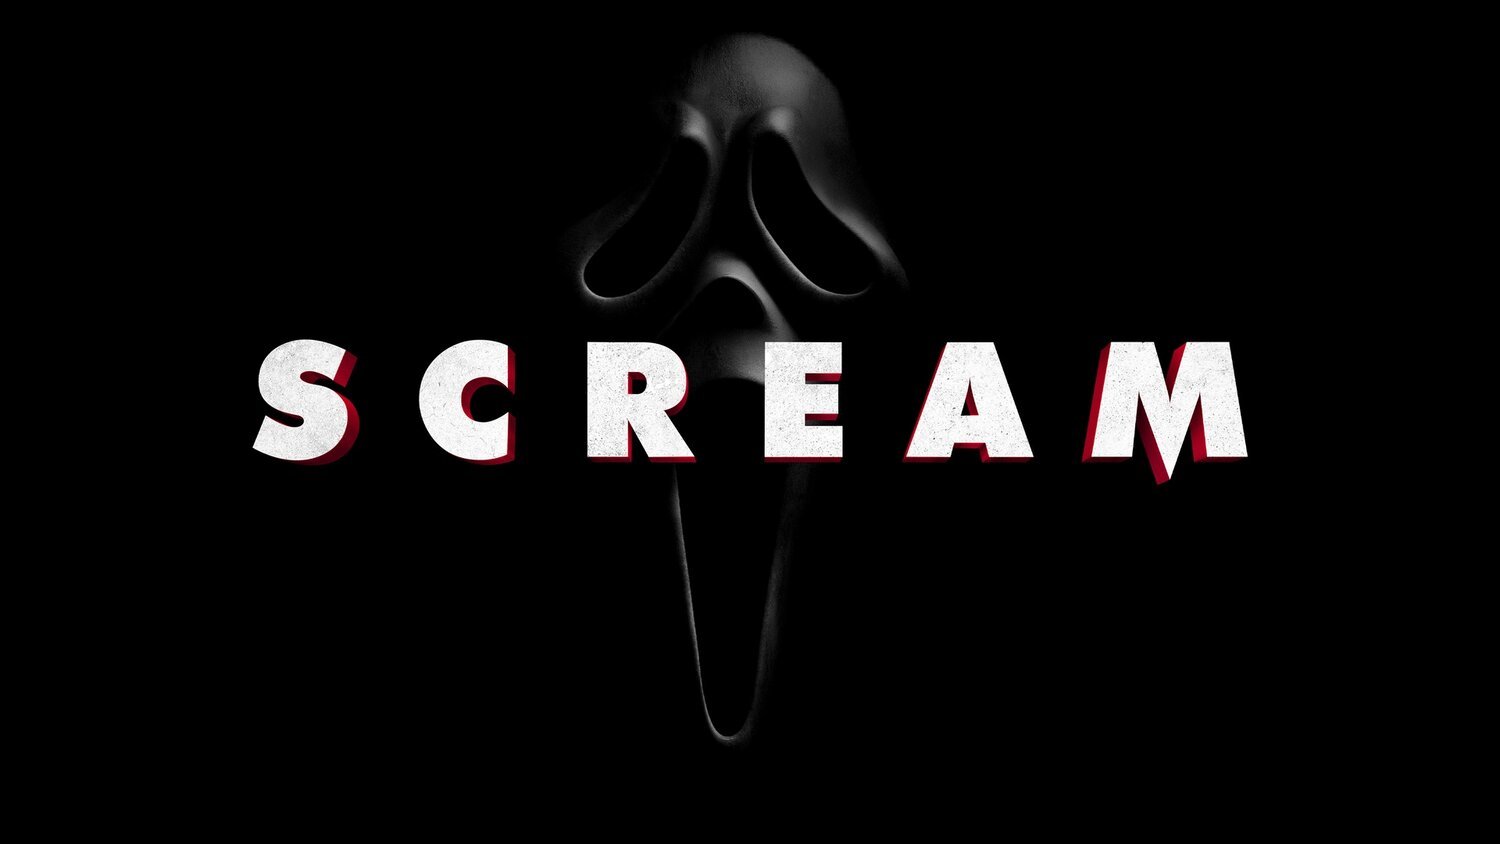 Drew Barrymore would love to see his character return for a new Scream